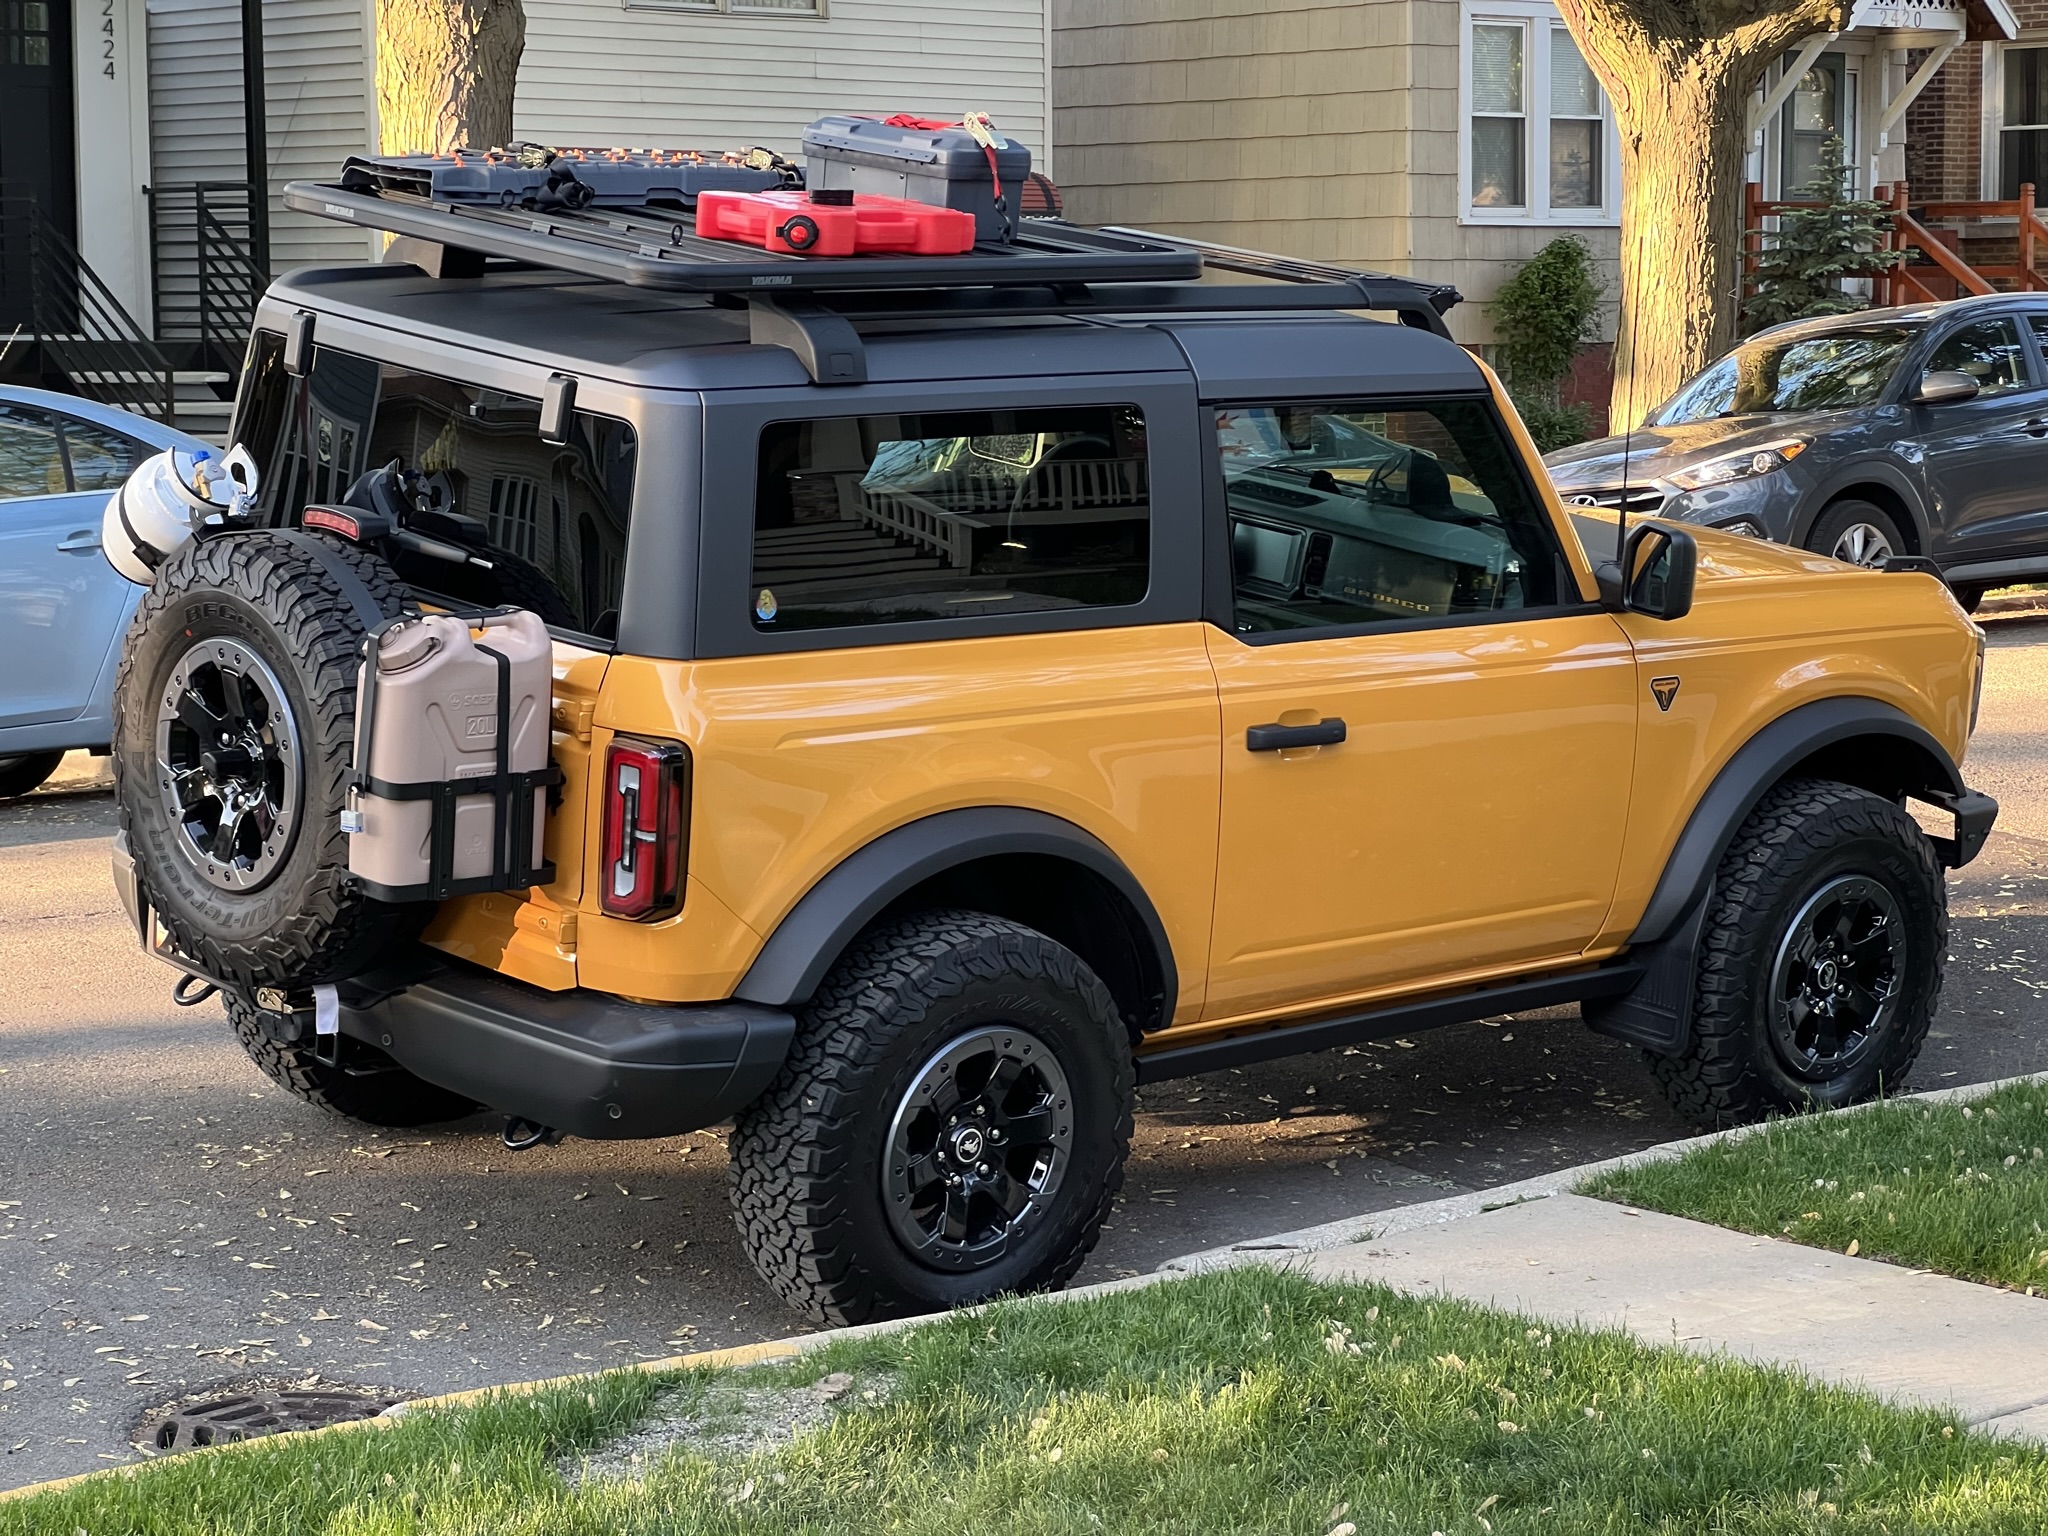 Ford Bronco 2 Door Broncos - What’s on your roof racks? [Photos Thread] IMG_6181